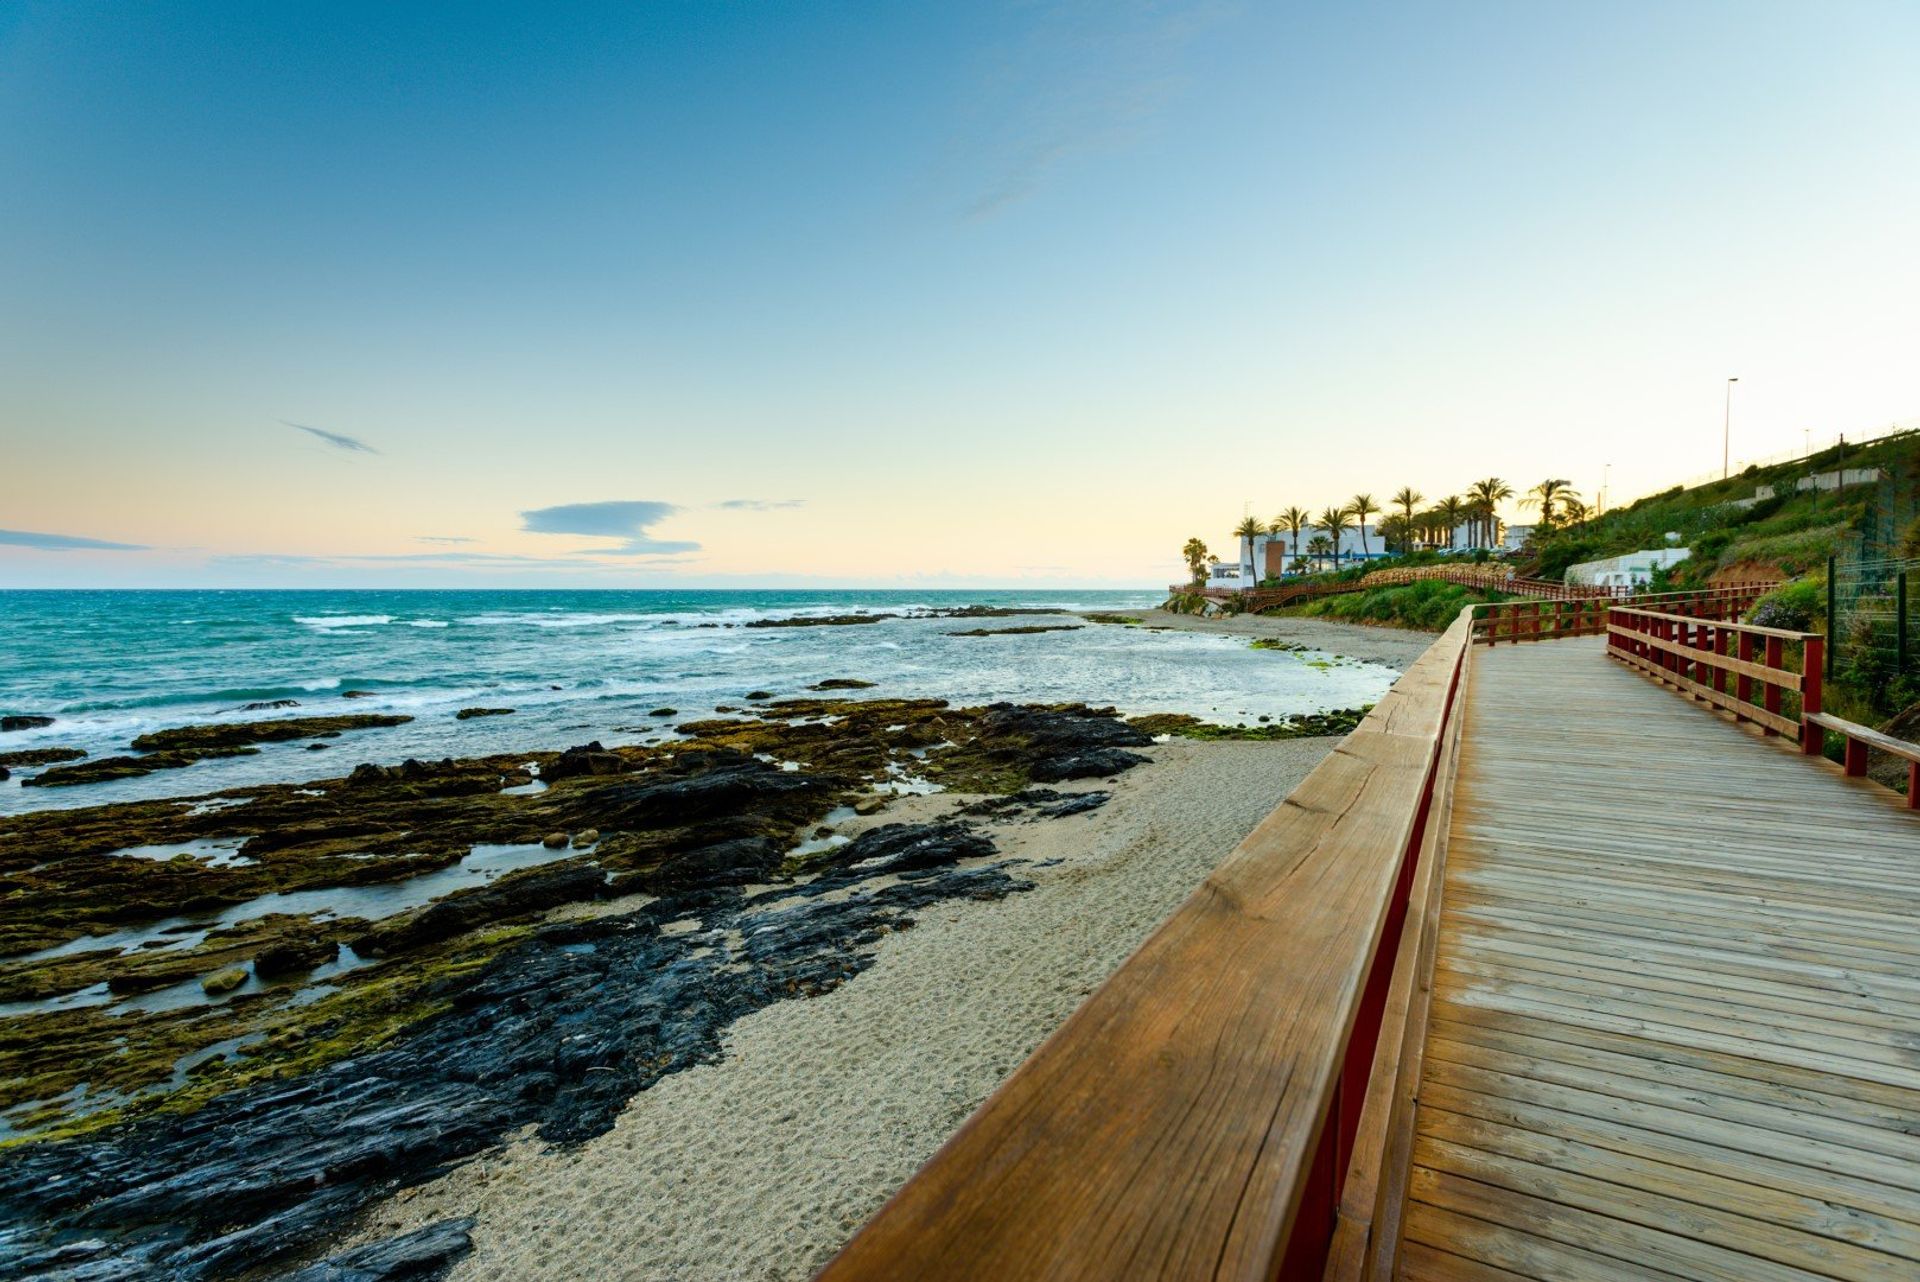 Take a romantic walk down the beach promenade and listen to the tranquil sounds of the Mediterranean 